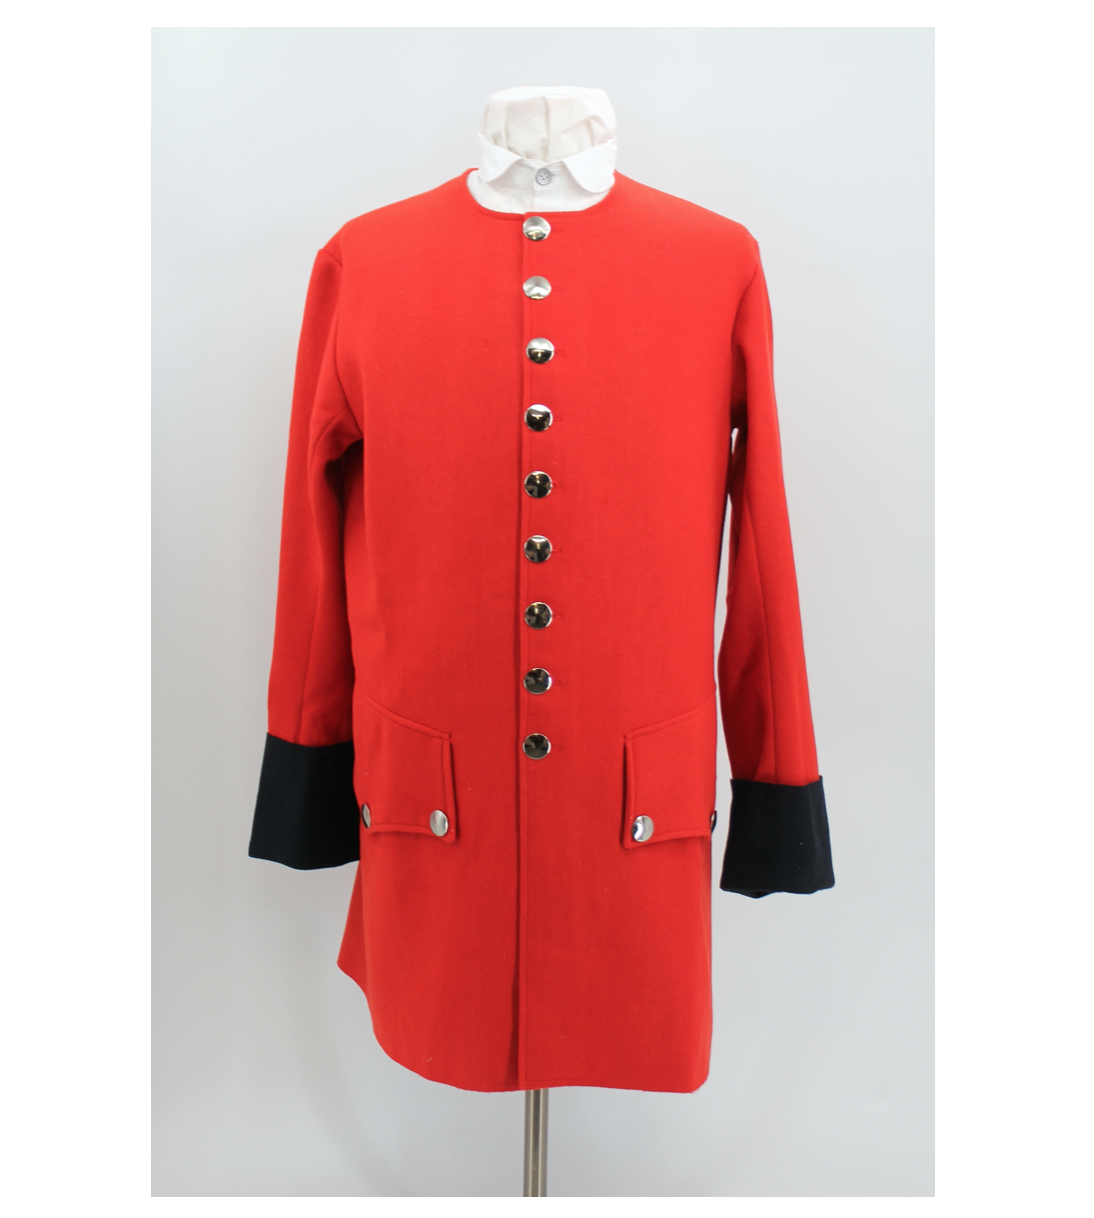 Red Wool Sleeved Waistcoat with Blue Cuffs - 1754 Virginia Regiment - Size 42 Без бренда